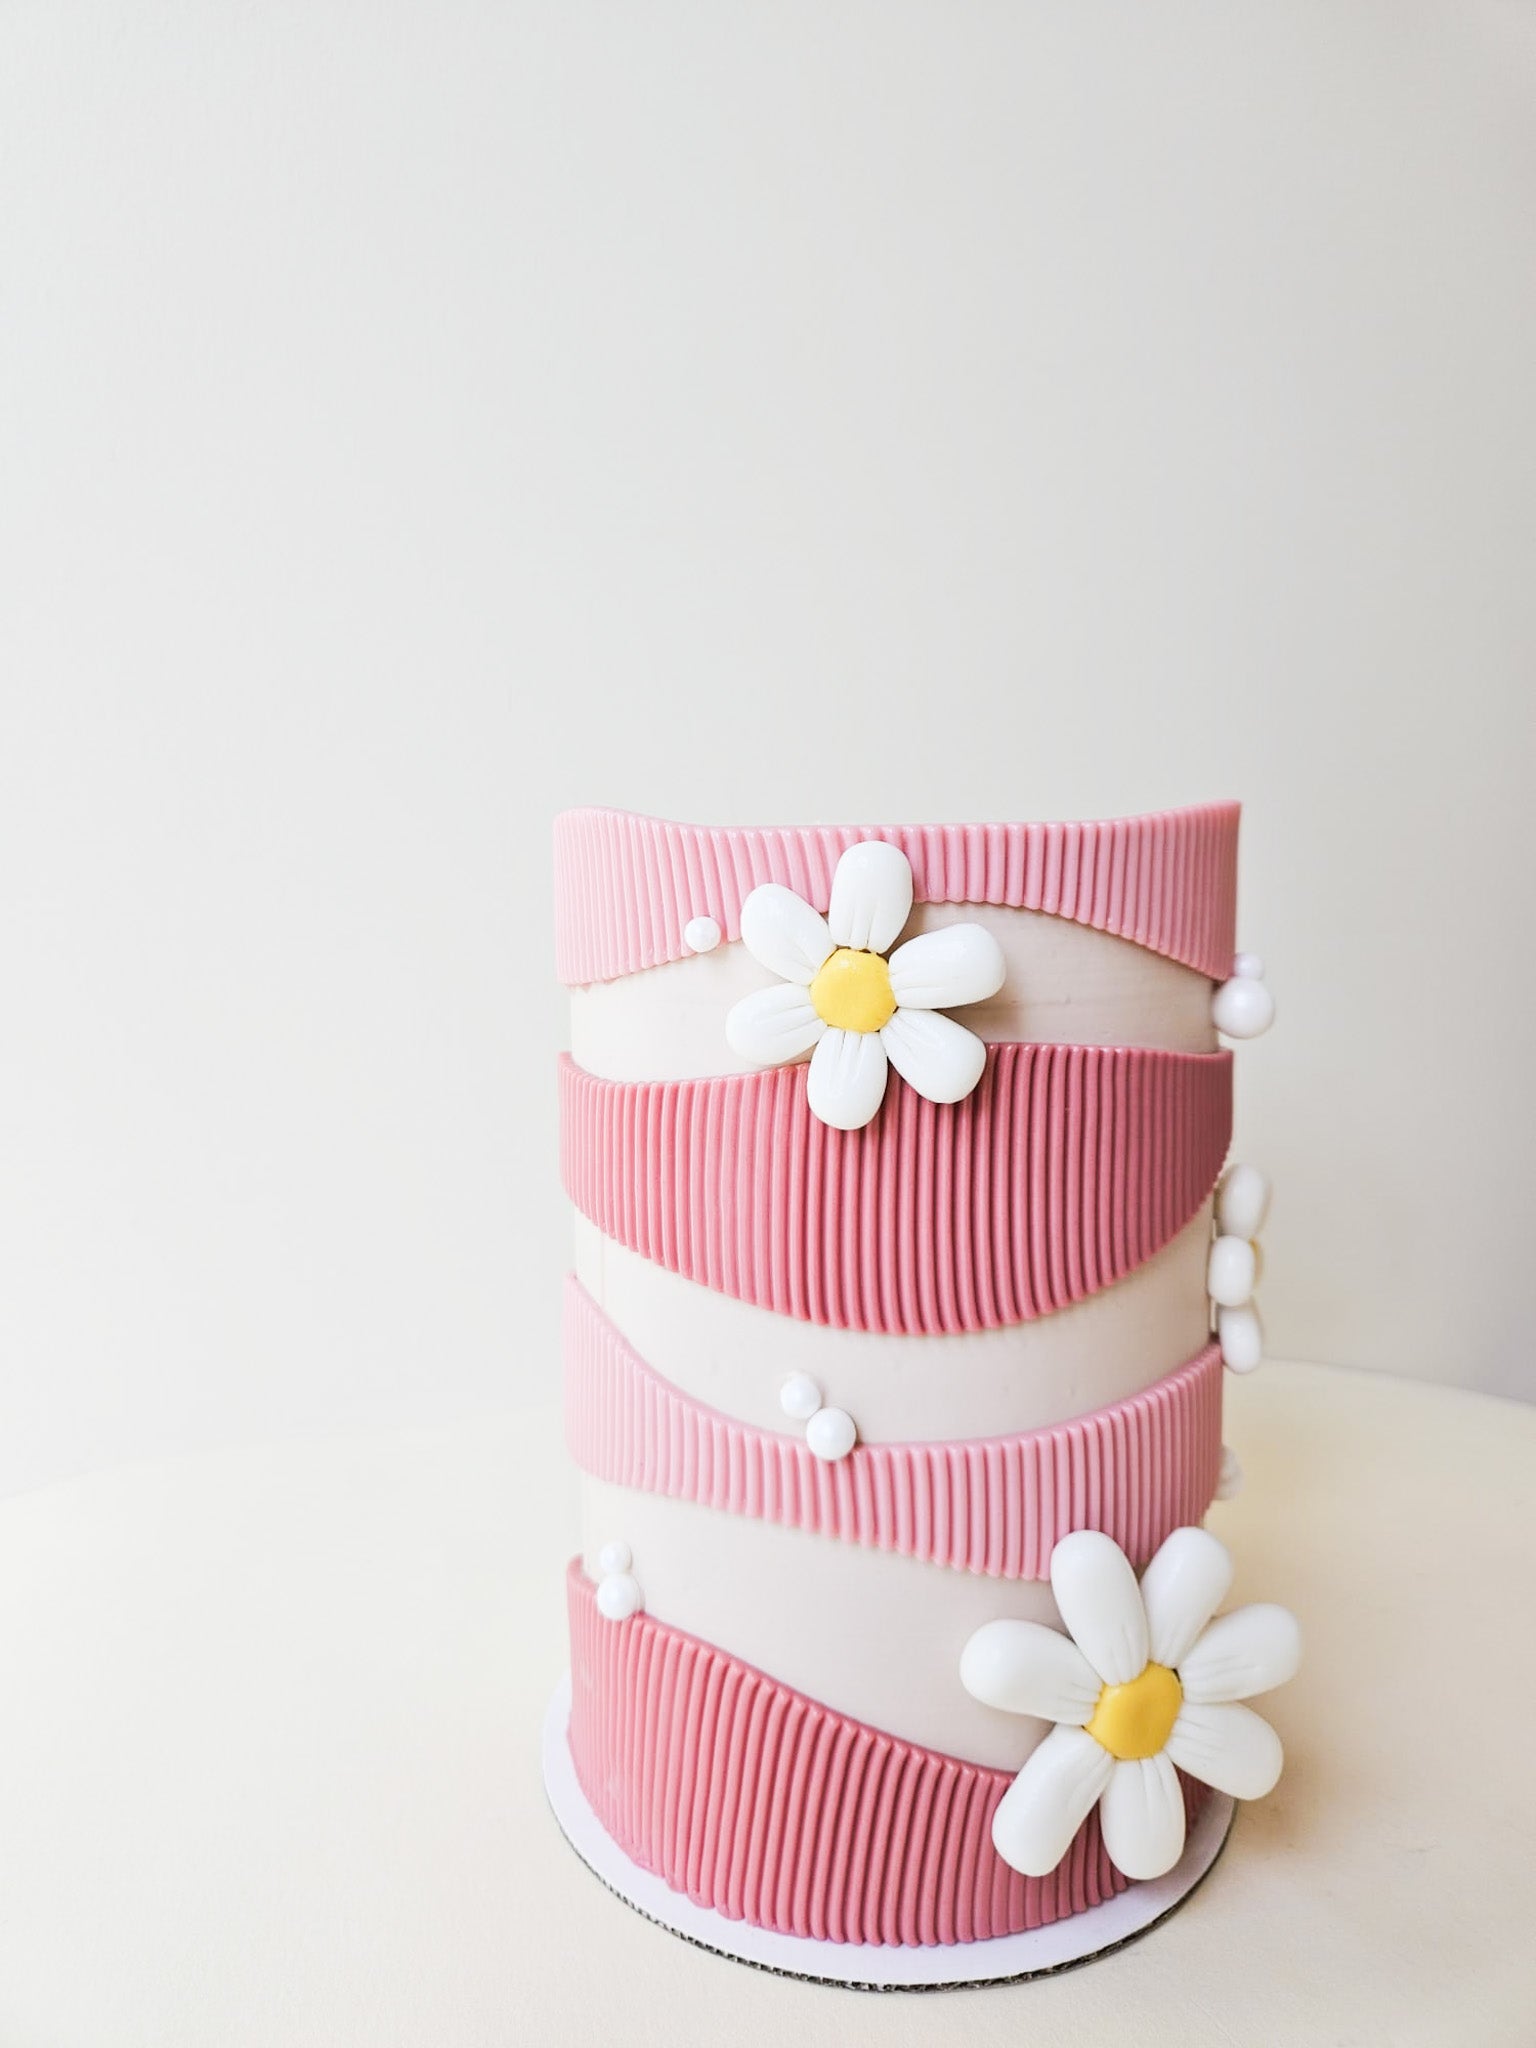 Rose daisy cake with daisies in full bloom